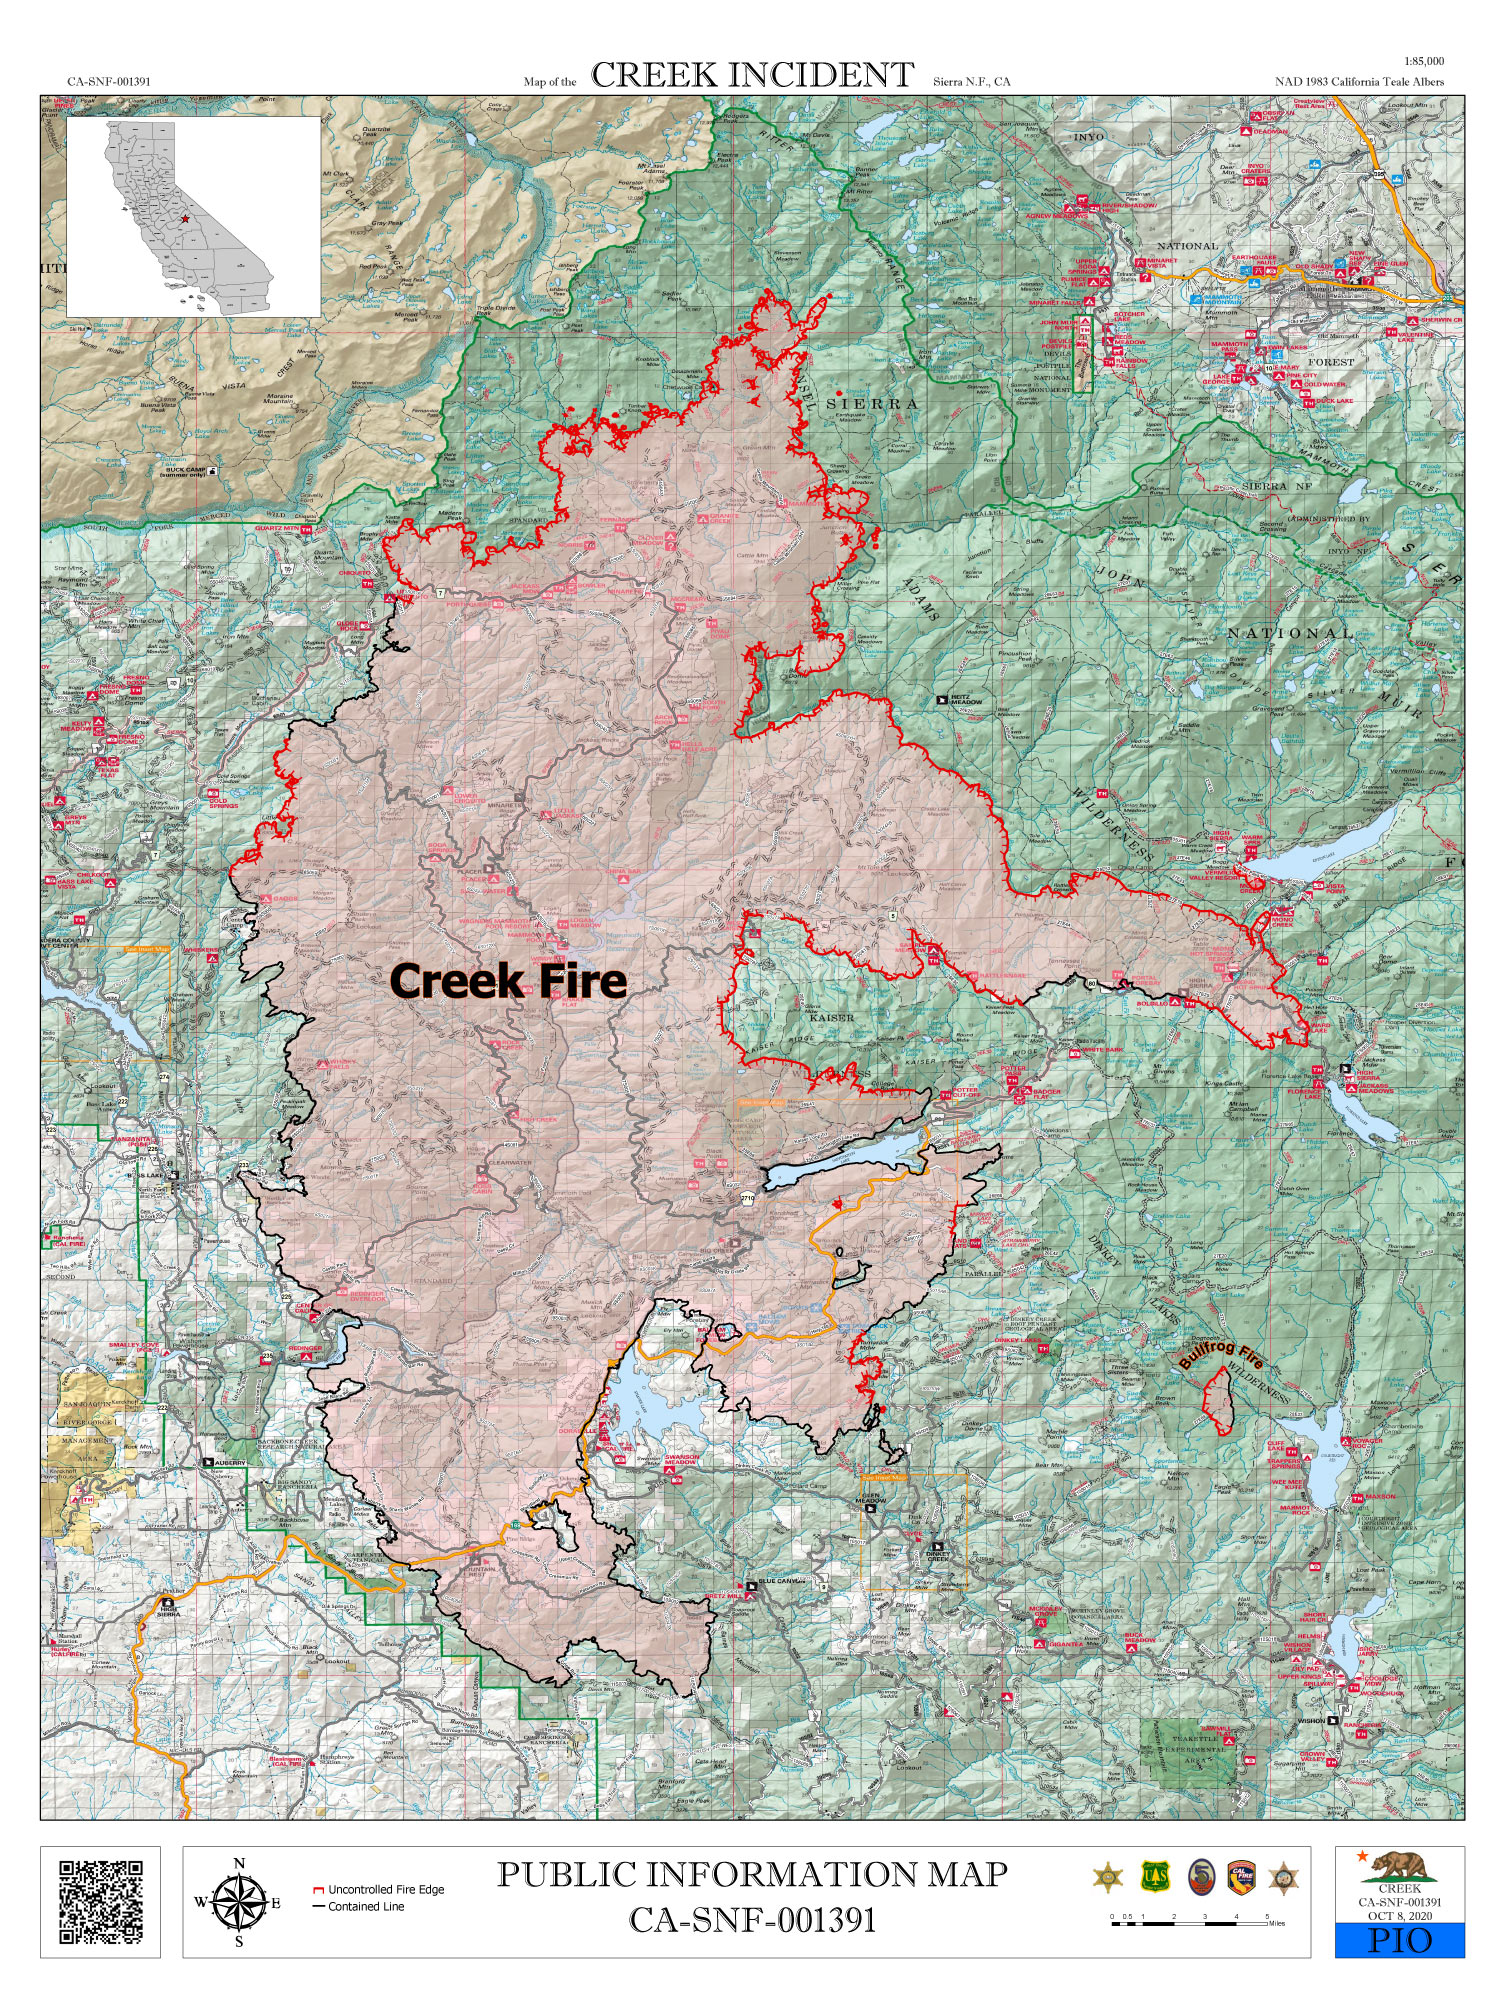 Sierra National Forest Creek Fire Public Information Map For Thursday October 8 2020 Shows Contained Line And Uncontrolled Fire Edge